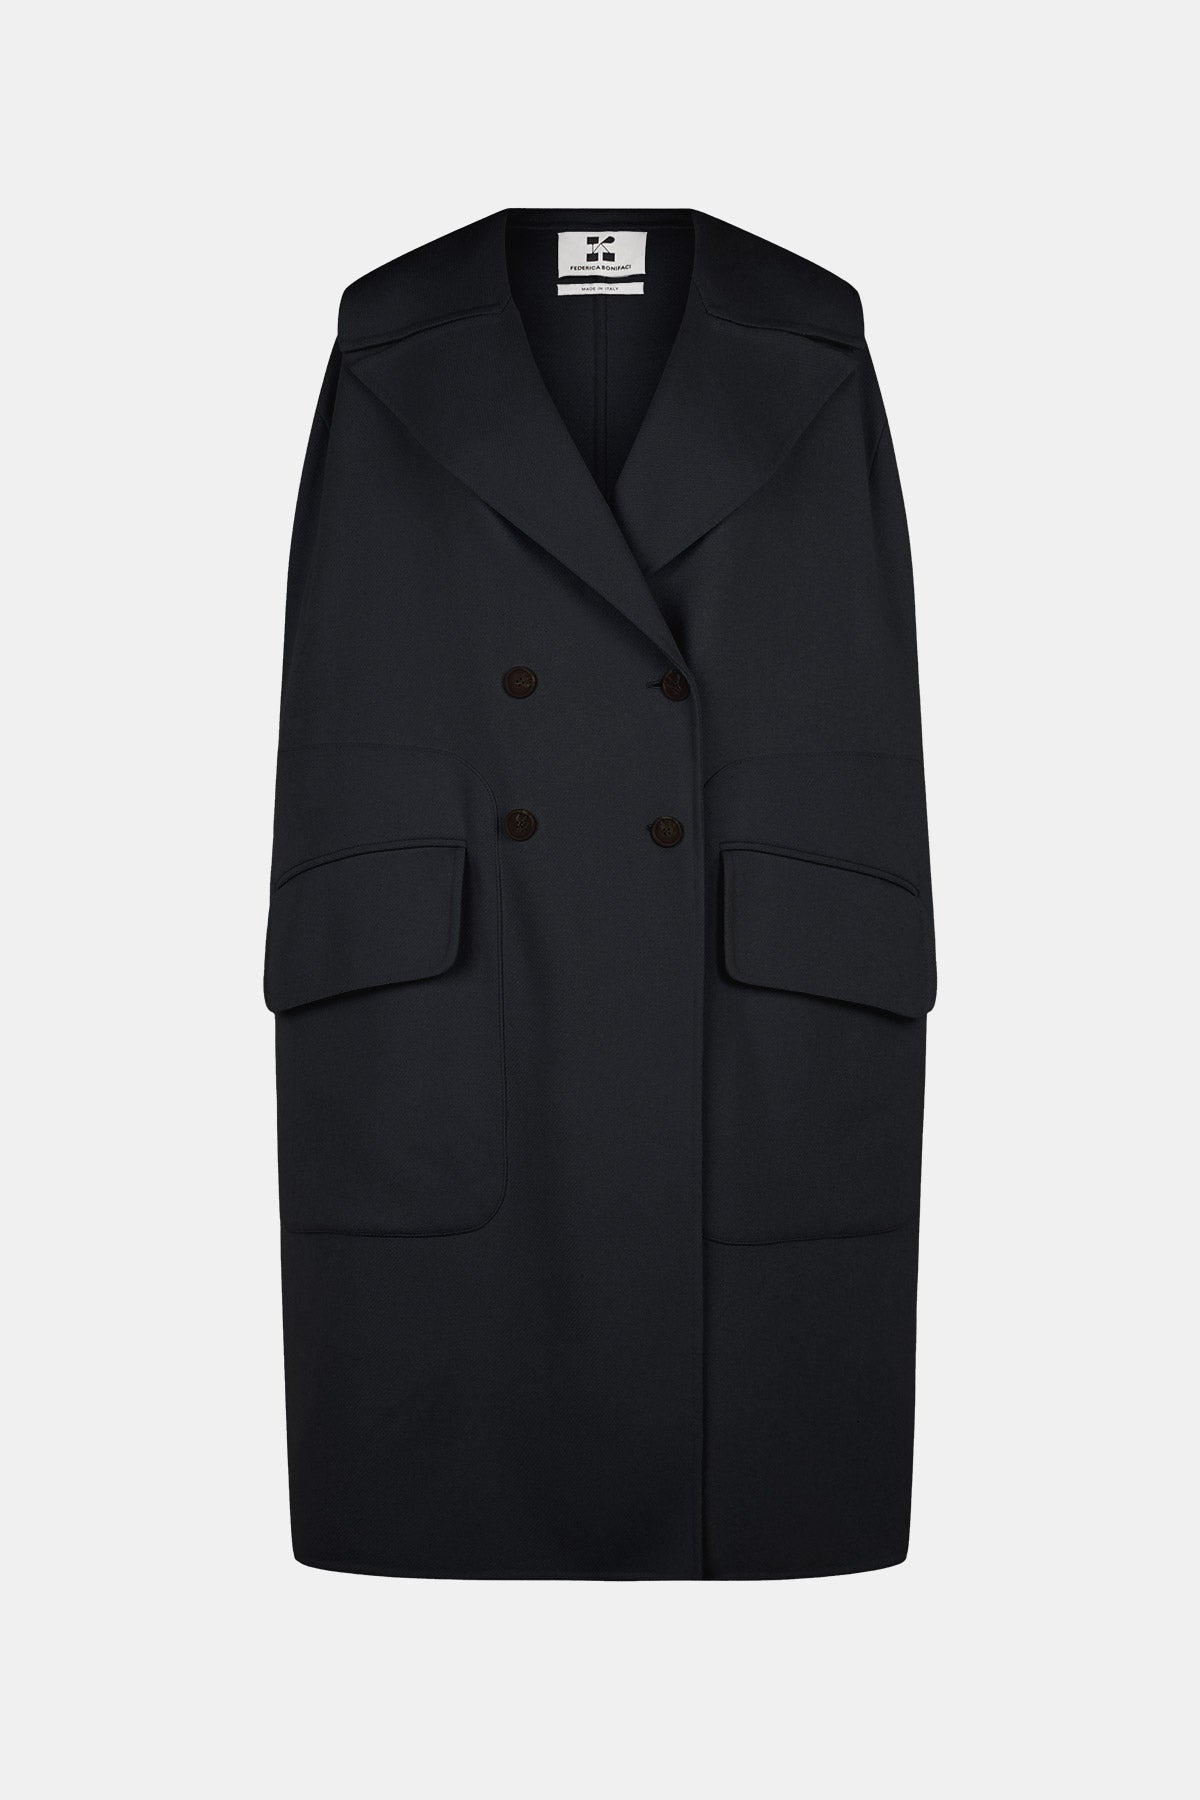 The Trench Cape